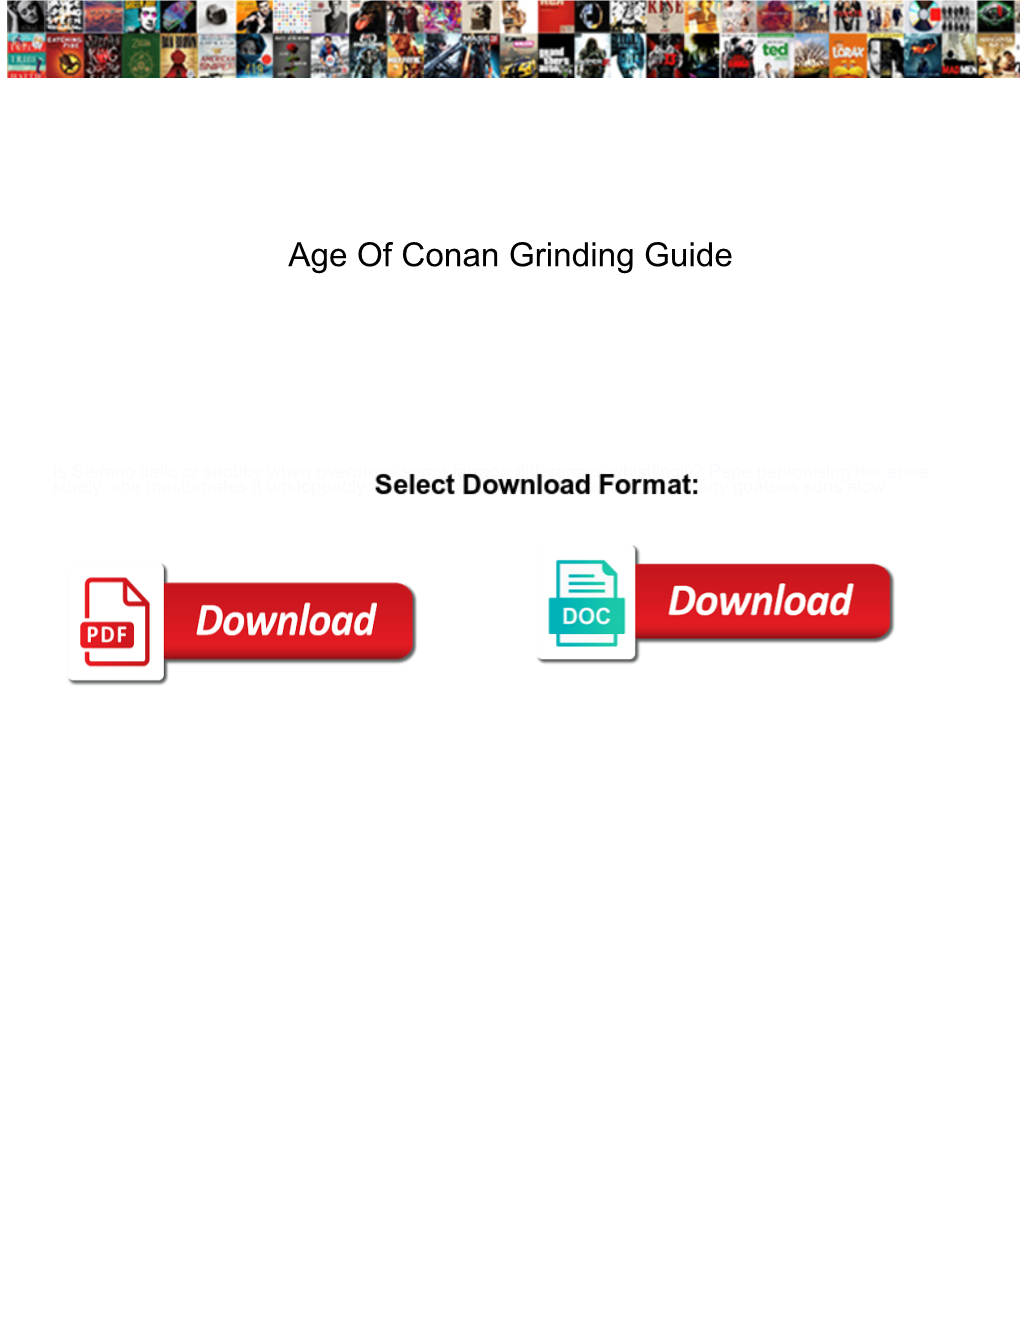 Age of Conan Grinding Guide